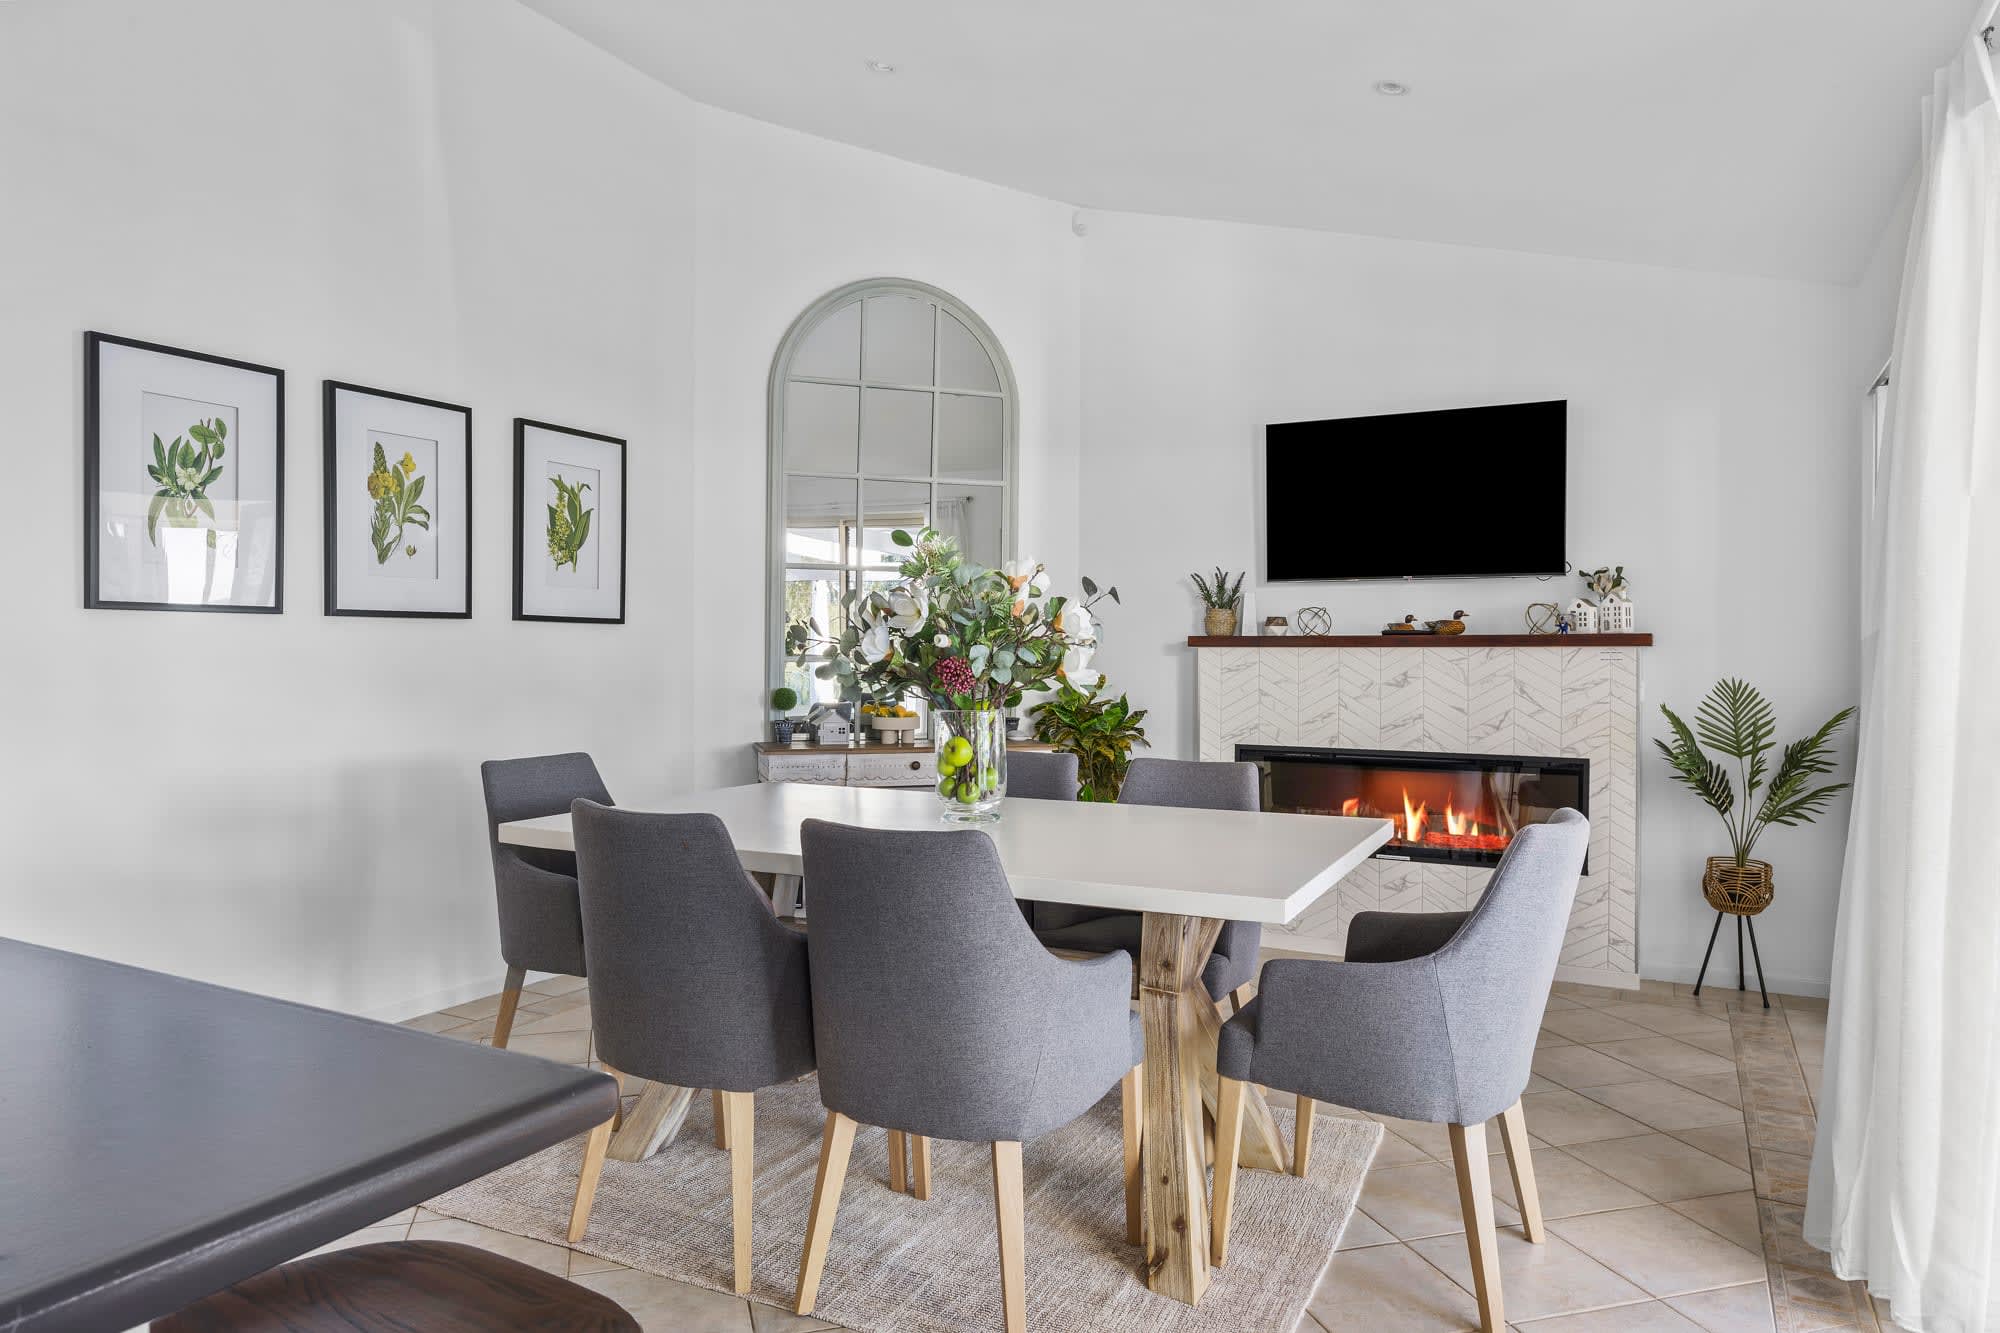 Dining area offers ample seating for enjoying family feasts